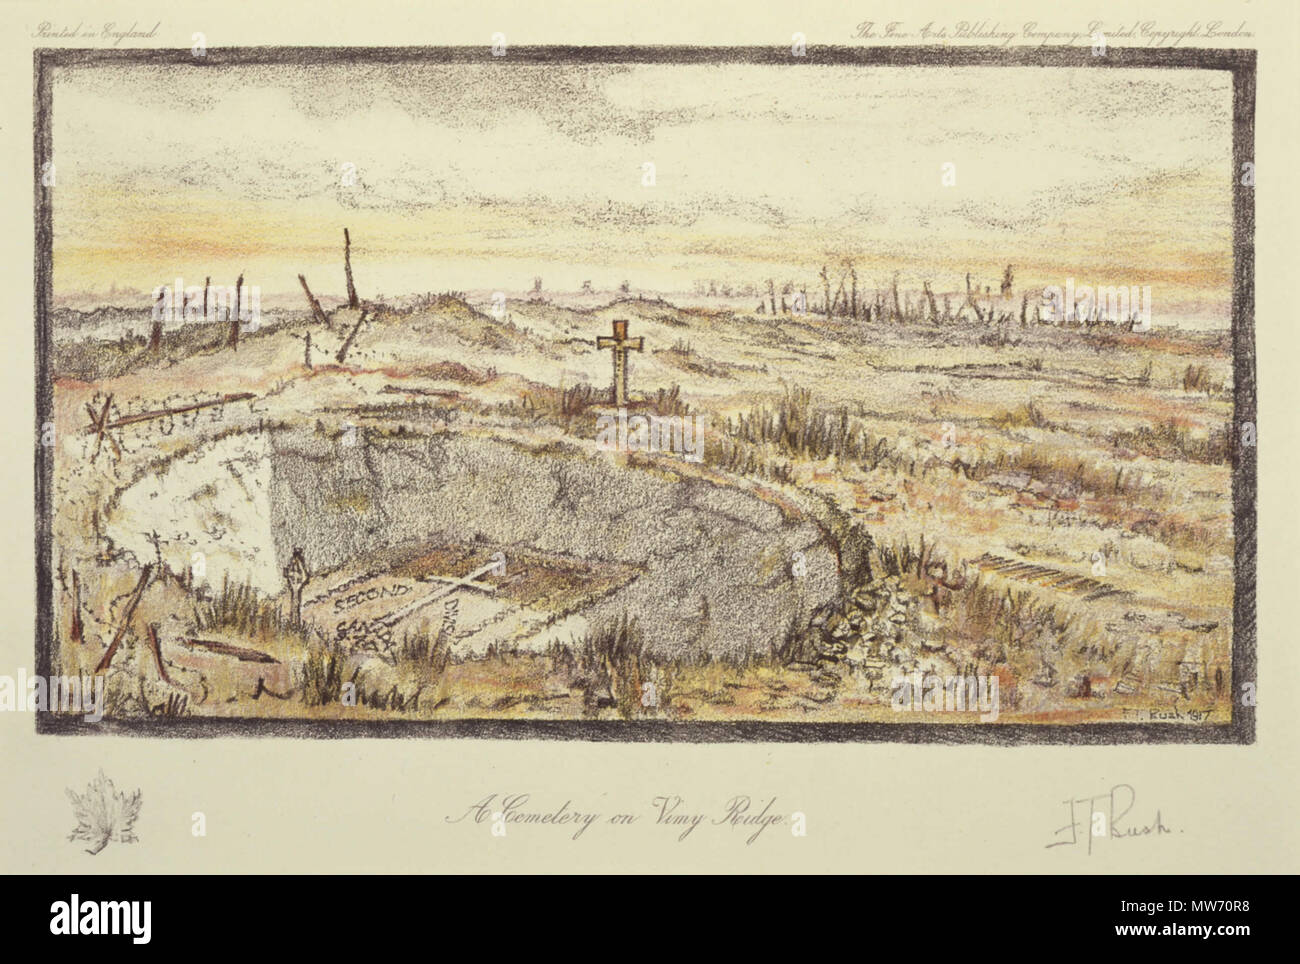 .  English: A Cemetery on Vimy Ridge .  English: This sketch depicts a memorial at the bottom of a shell crater for fallen soldiers of the 2nd Canadian Division during the Battle of Vimy Ridge. . 1917  19 A Cemetery on Vimy Ridge - Frederick Thwaites Bush Stock Photo